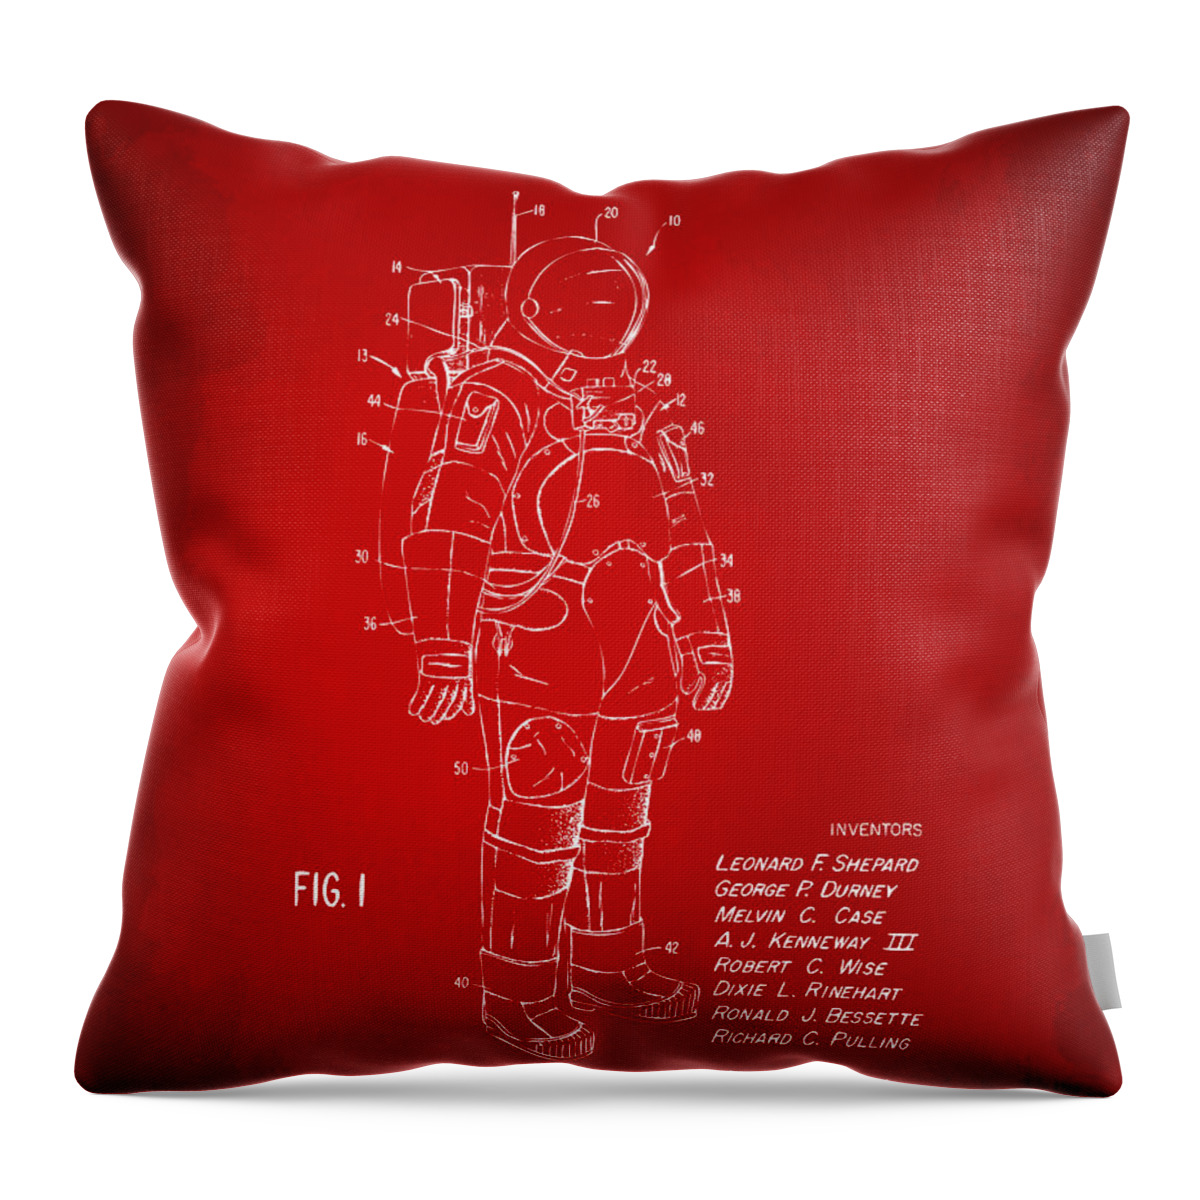 Space Suit Throw Pillow featuring the digital art 1973 Space Suit Patent Inventors Artwork - Red by Nikki Marie Smith